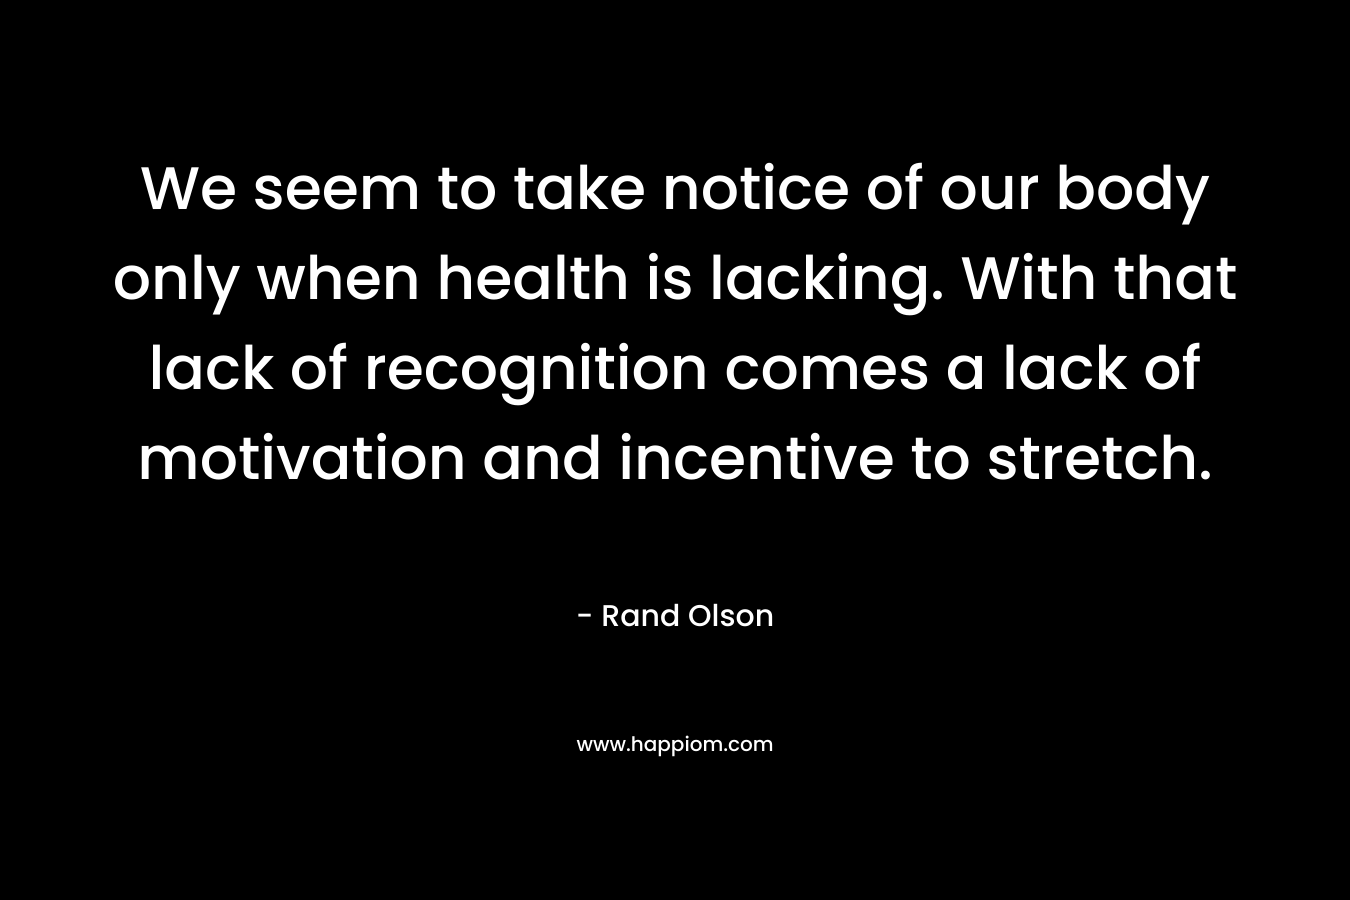 We seem to take notice of our body only when health is lacking. With that lack of recognition comes a lack of motivation and incentive to stretch.